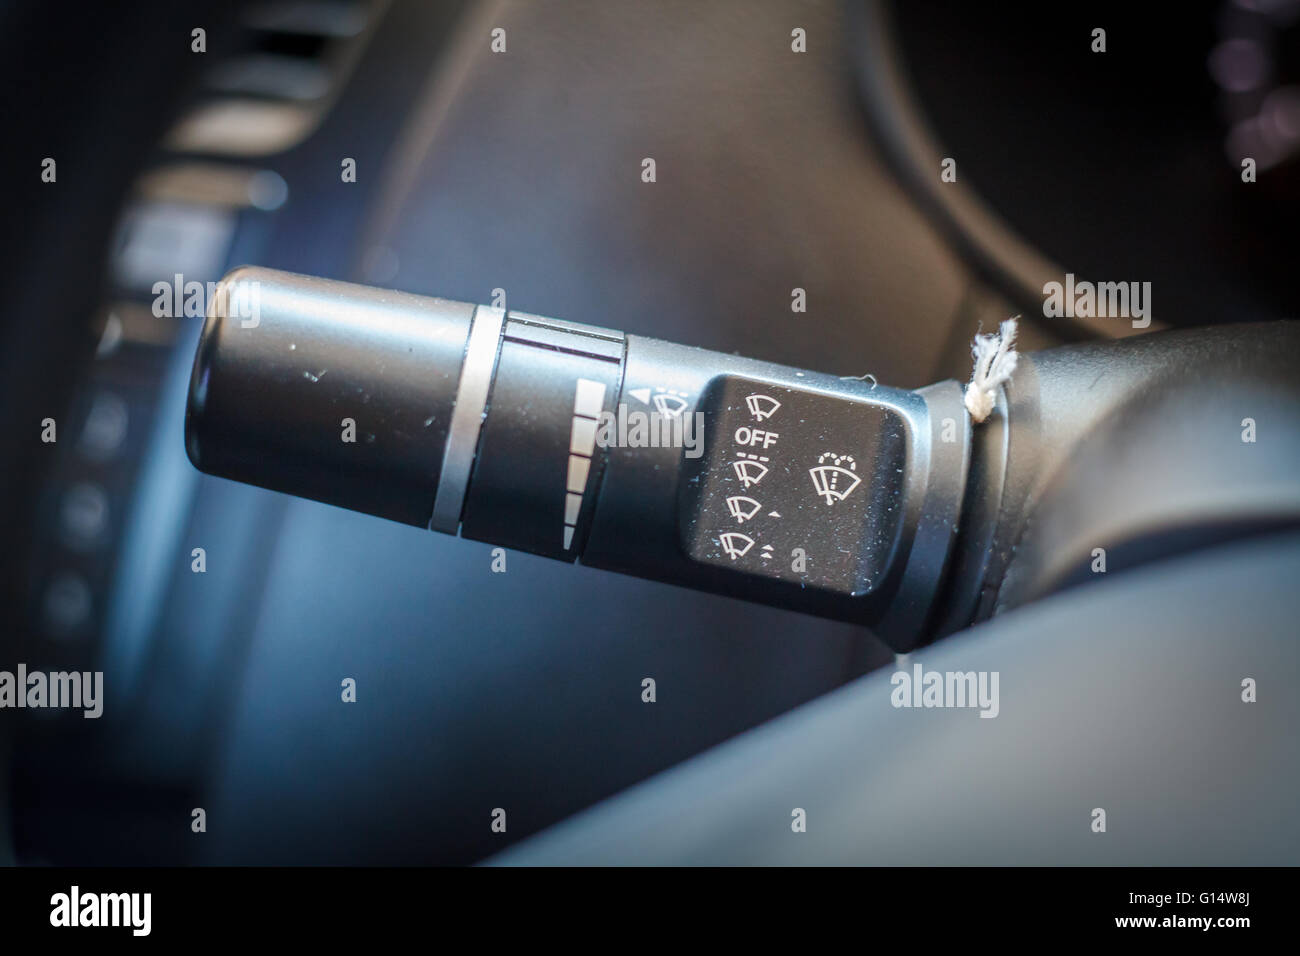 Wipers control buttons in car interior. Stock Photo